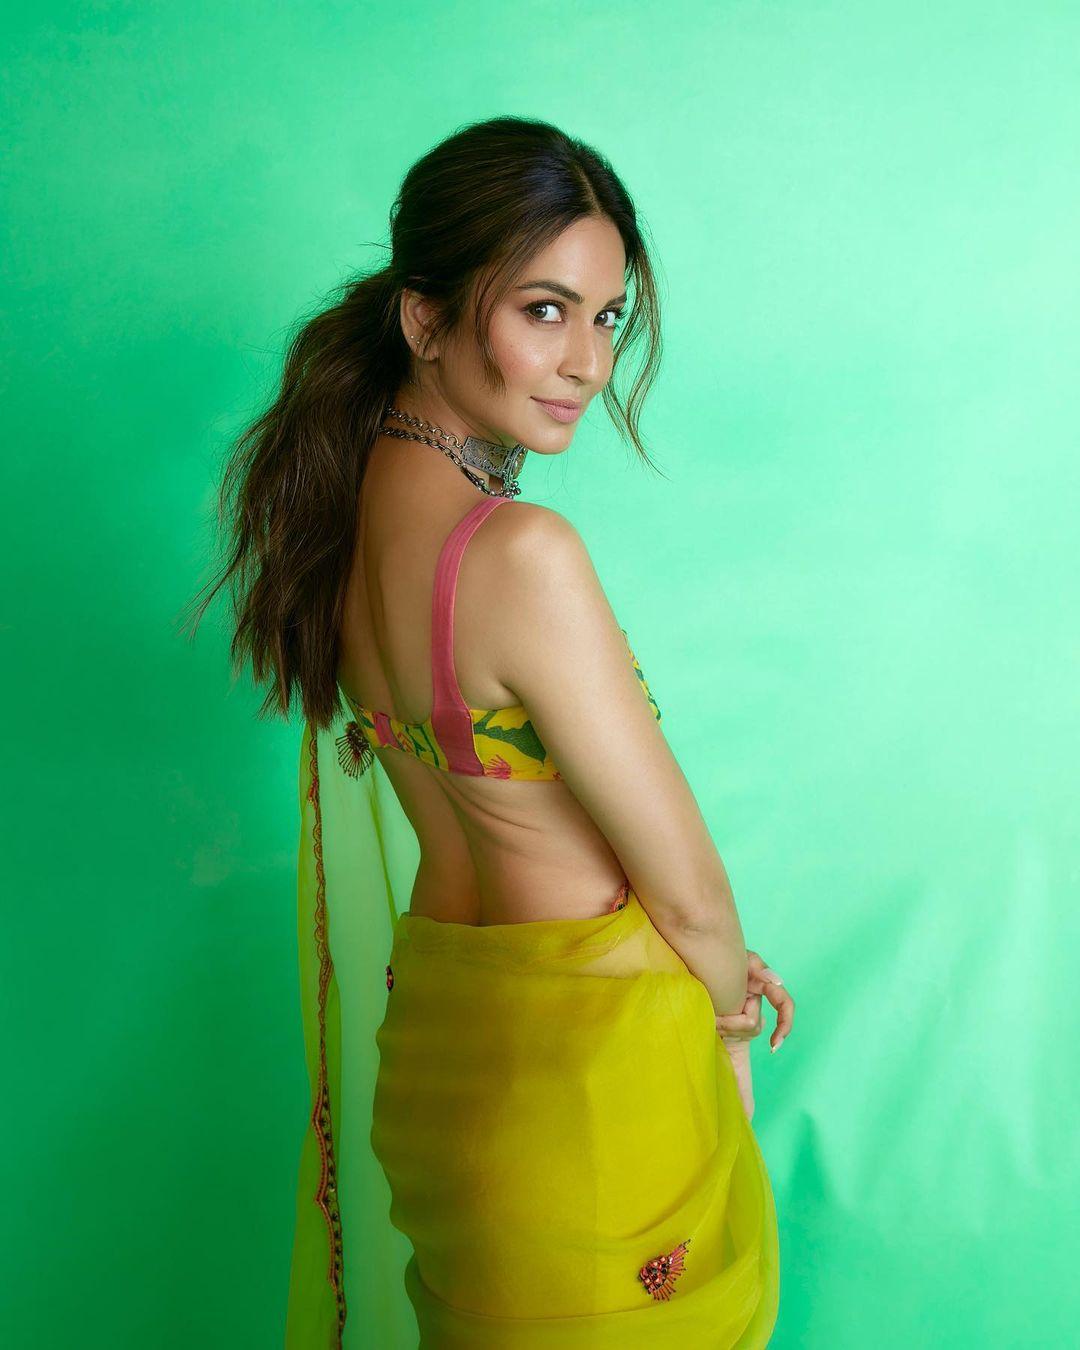 How to Pose in a Saree for the Ultimate Photoshoot